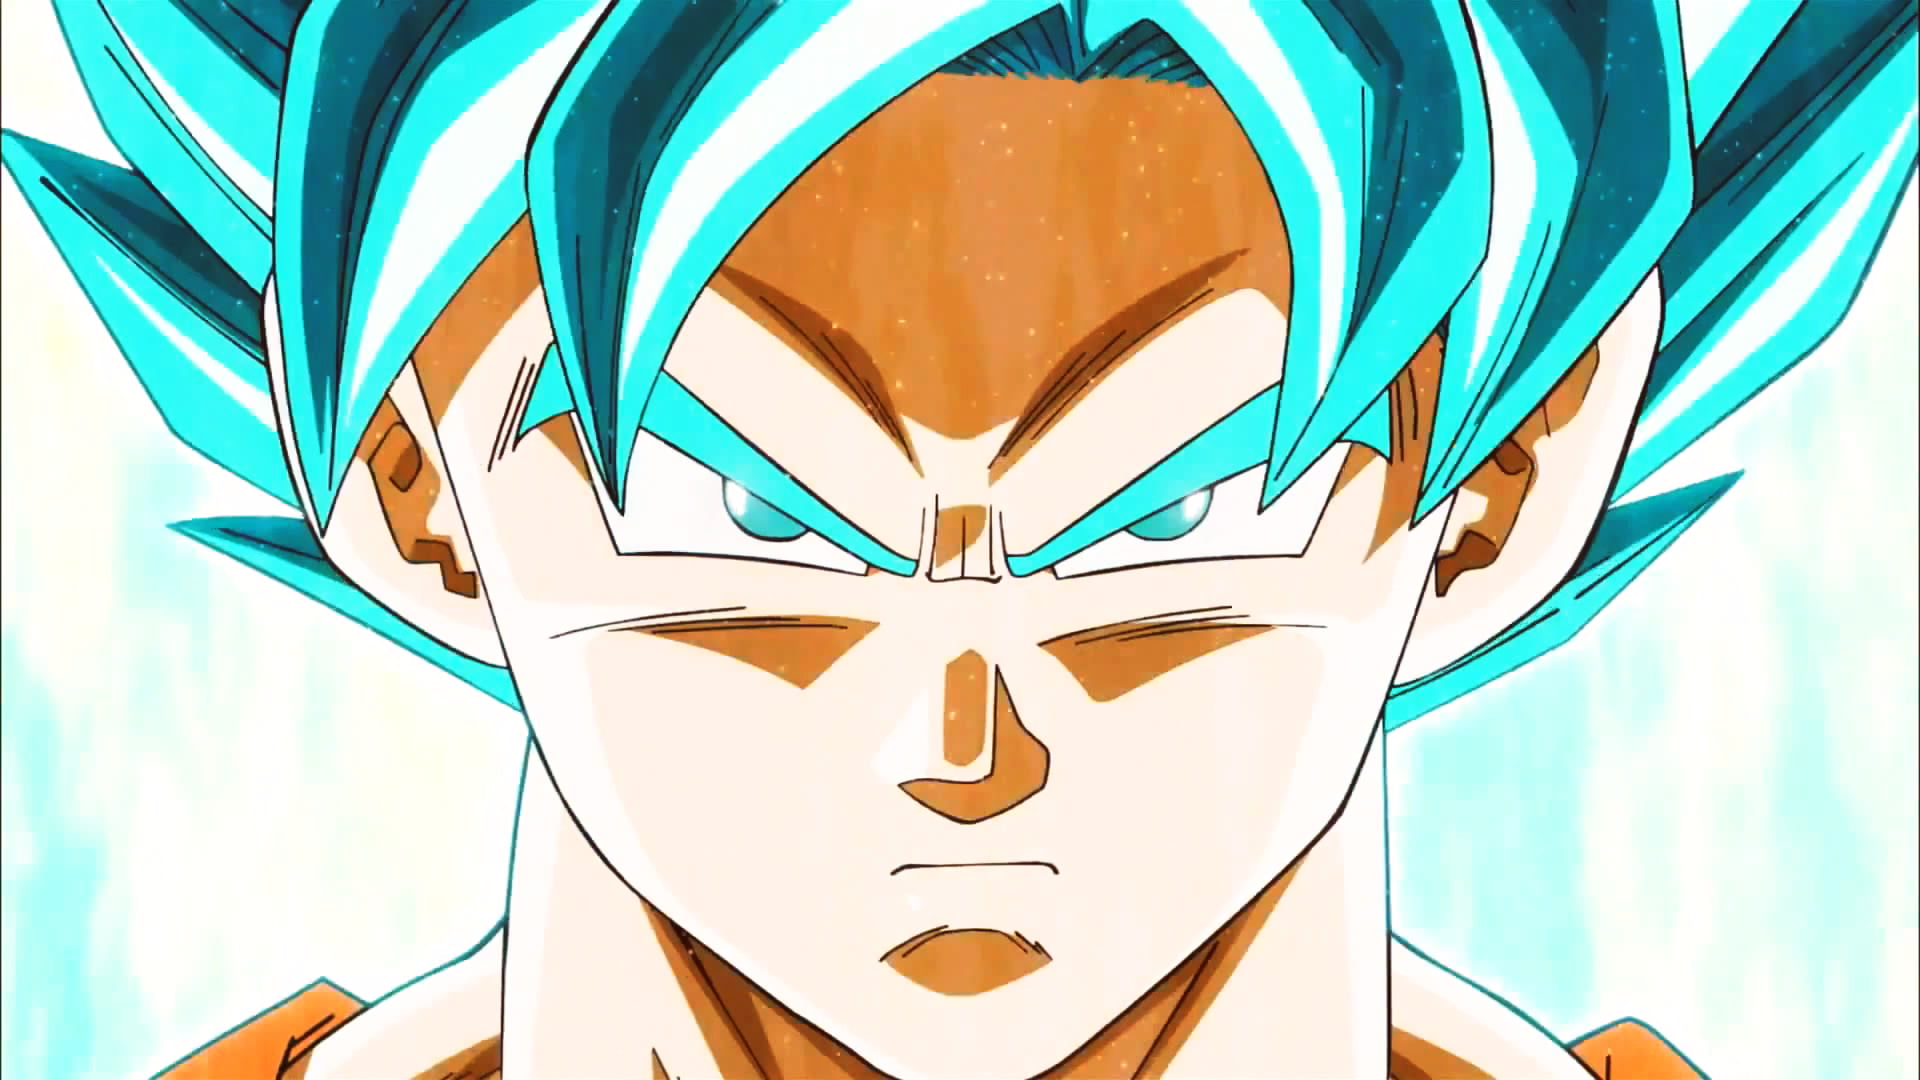 Goku's Blue Hair Transformation in Revival of F - wide 5